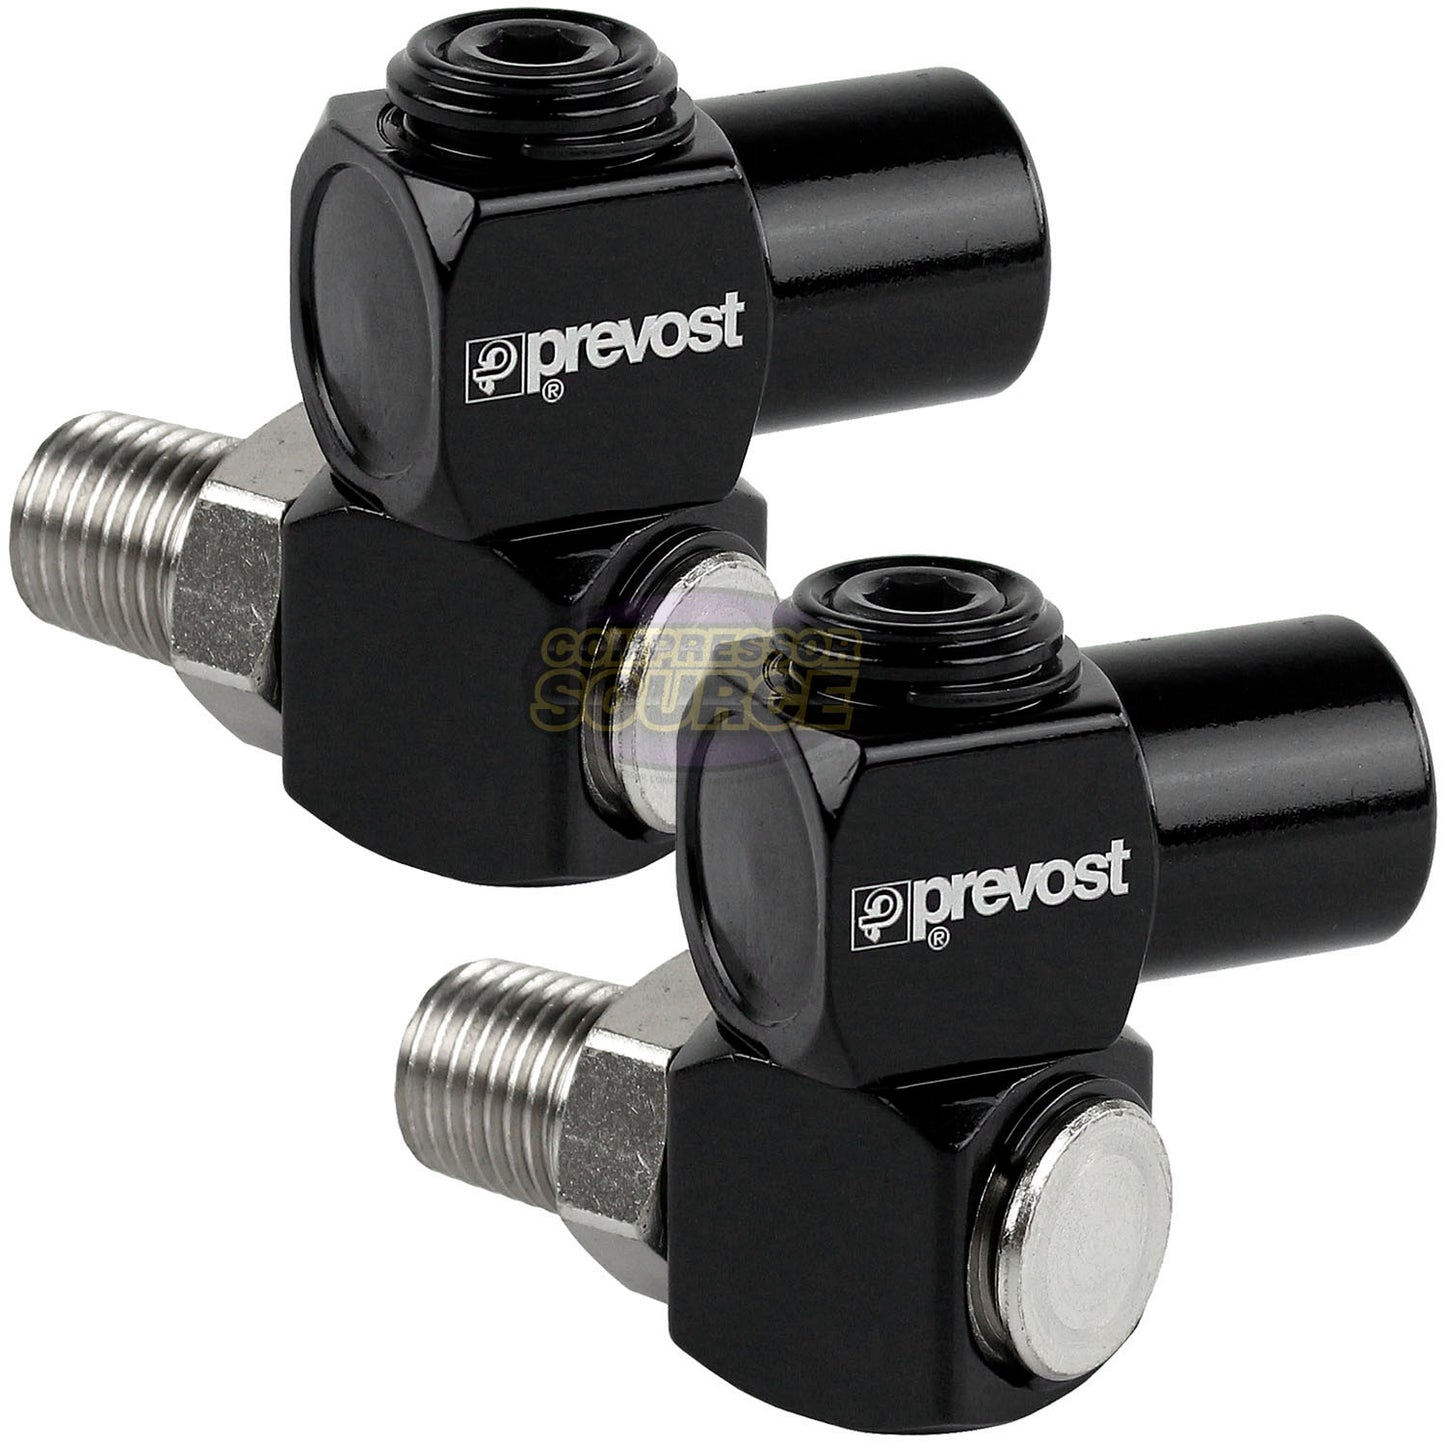 2 Prevost Universal 360 1/4" NPT Compressed Air Flow Tool Hose Connection Swivel